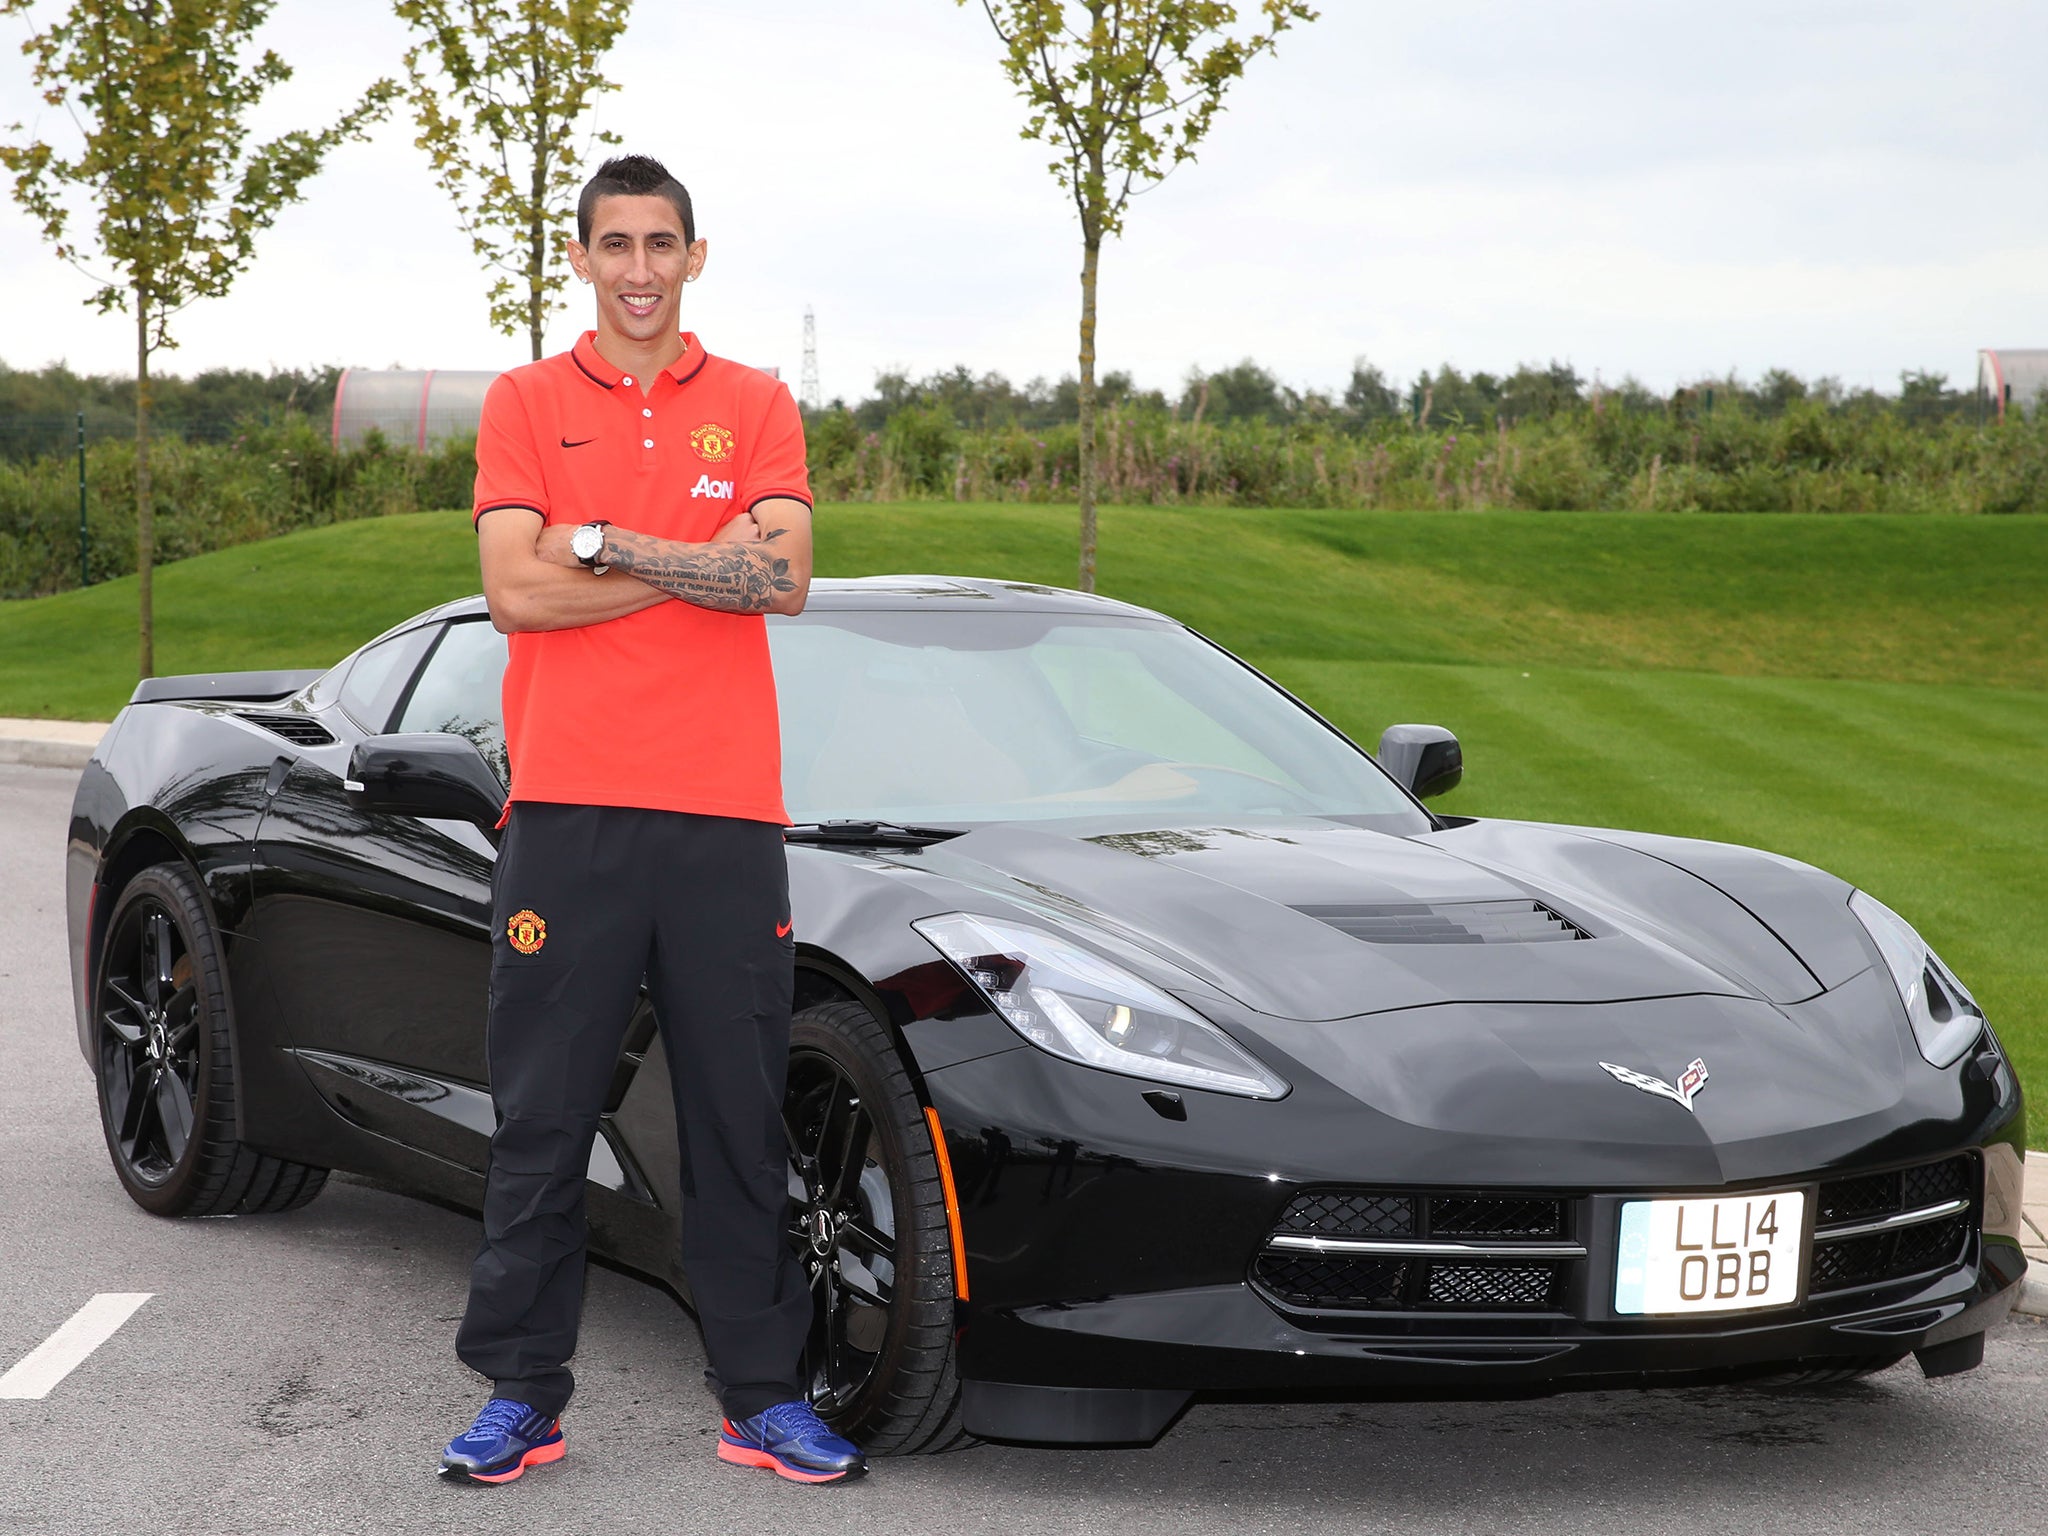 From a poor childhood in Argentina, Angel Di Maria has earned his Chevrolet and his Manchester United shirt